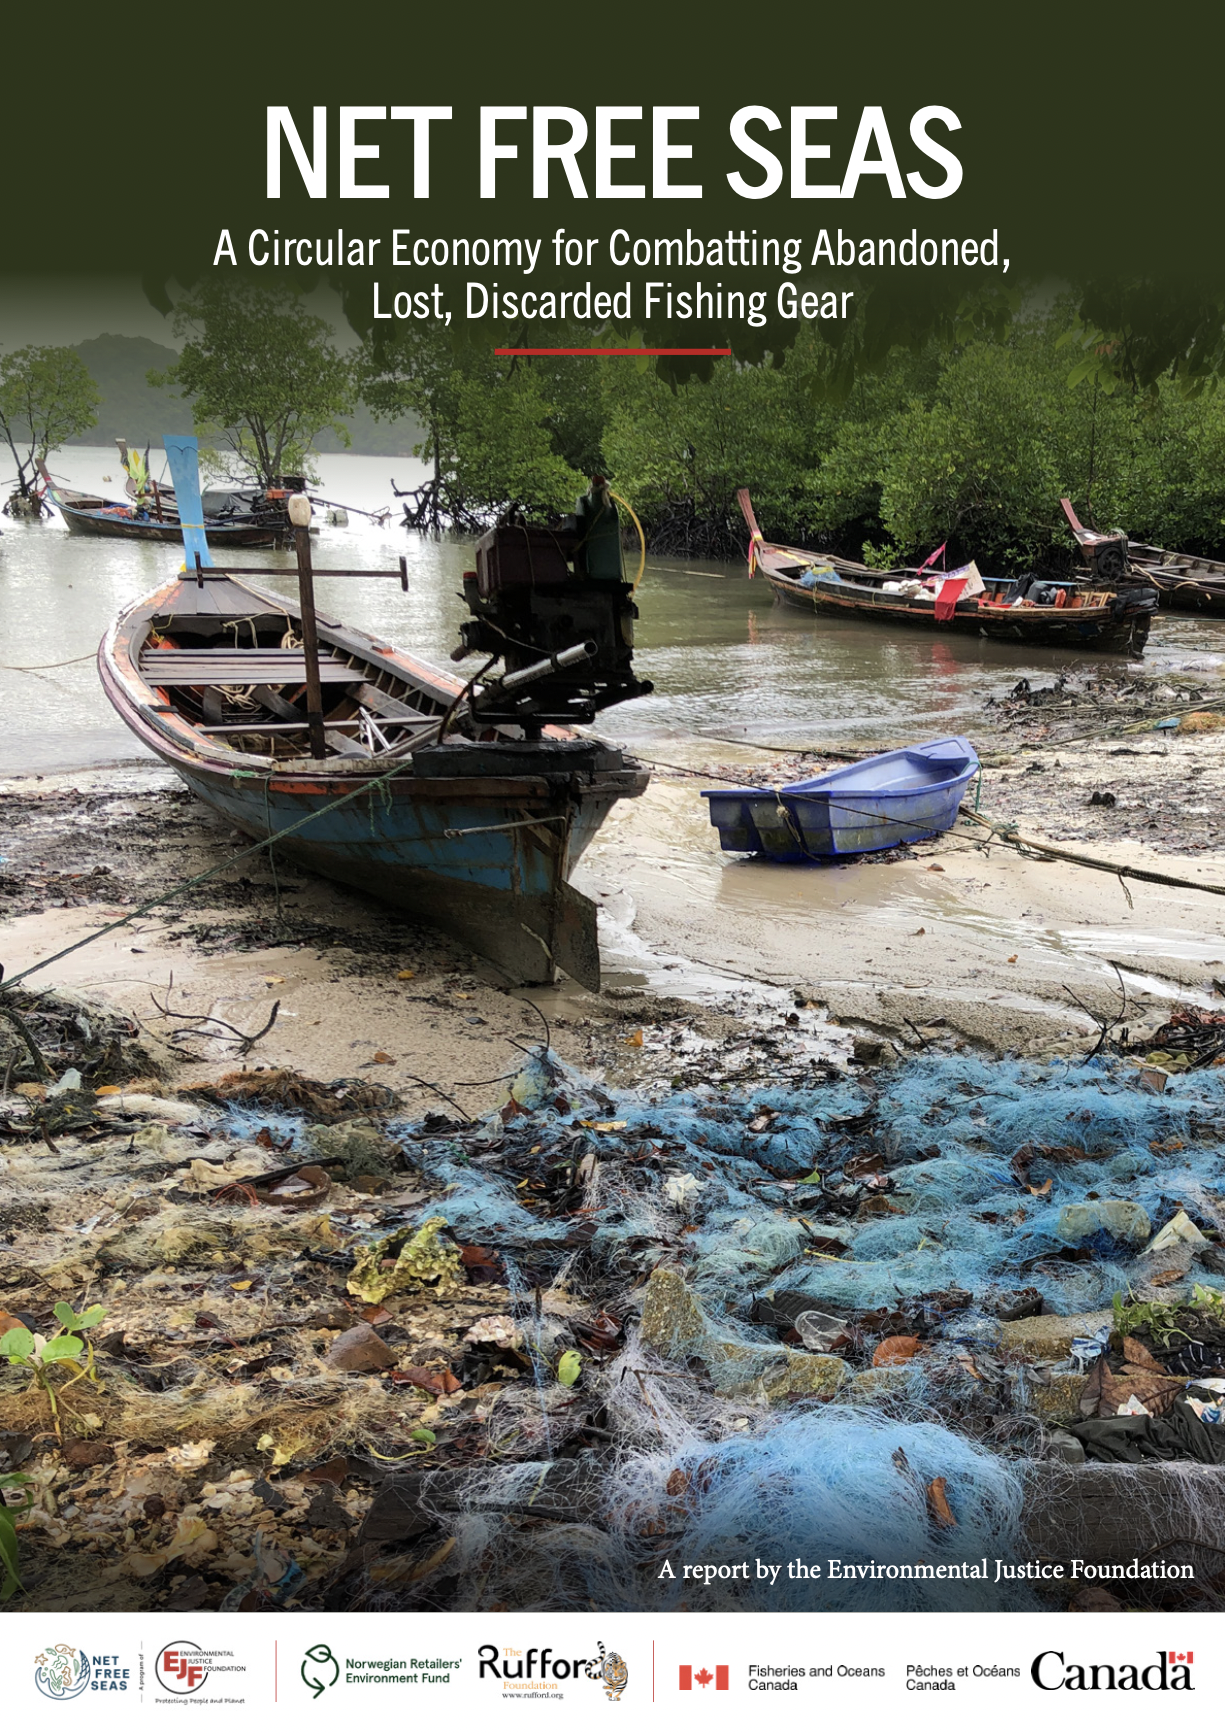 Net Free Seas: A Circular Economy for Combatting Abandoned, Lost, Discarded Fishing Gear